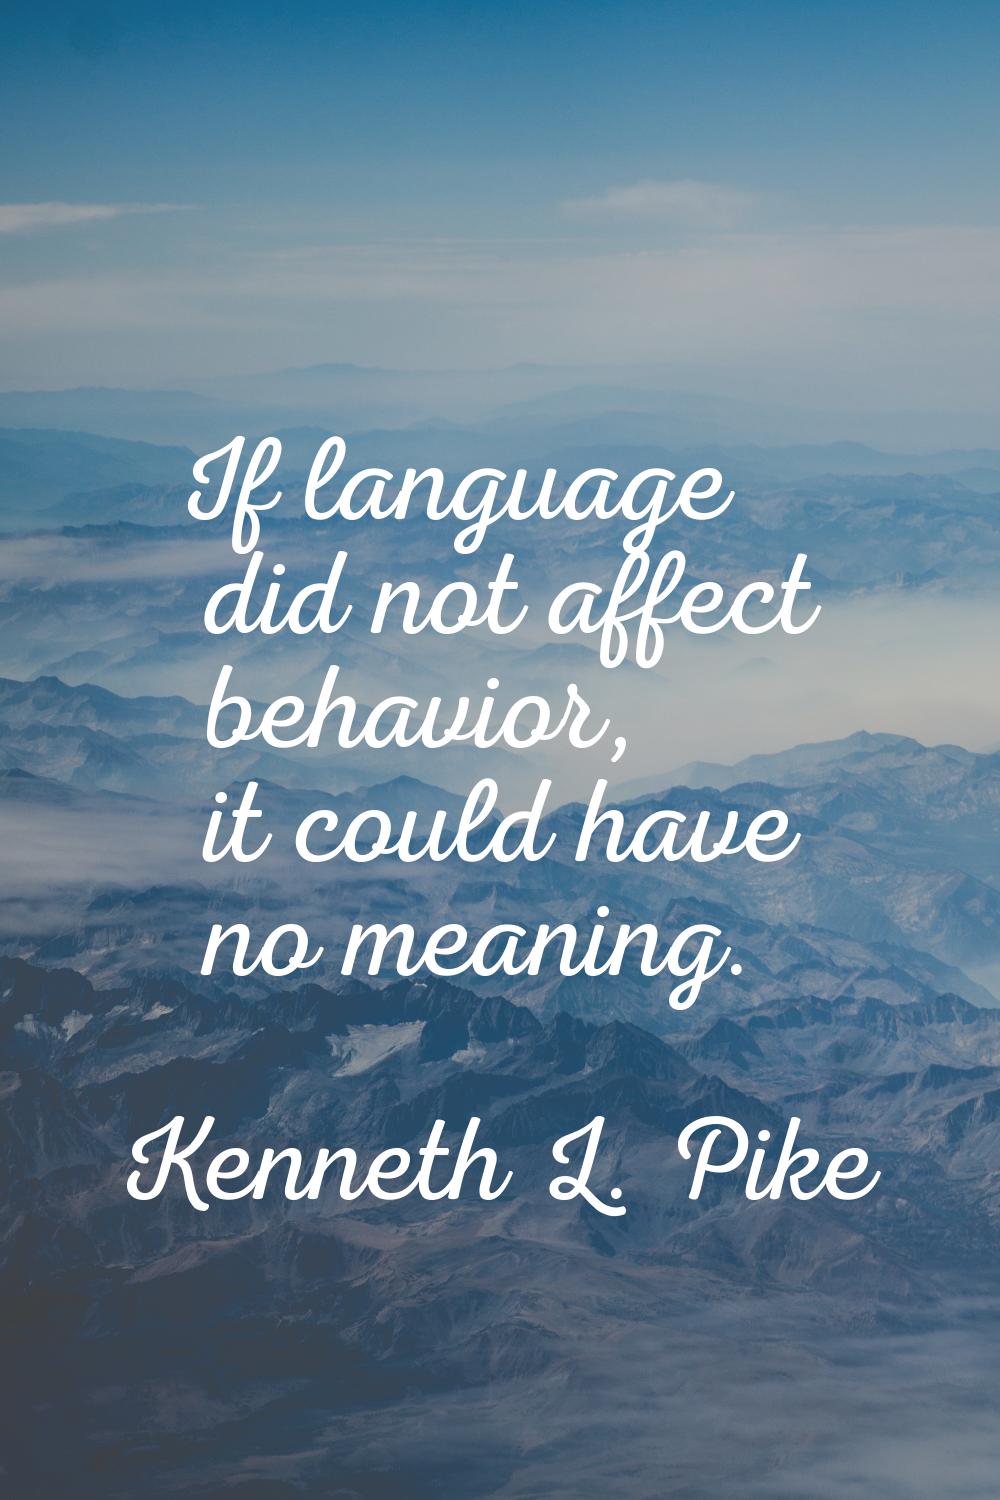 If language did not affect behavior, it could have no meaning.